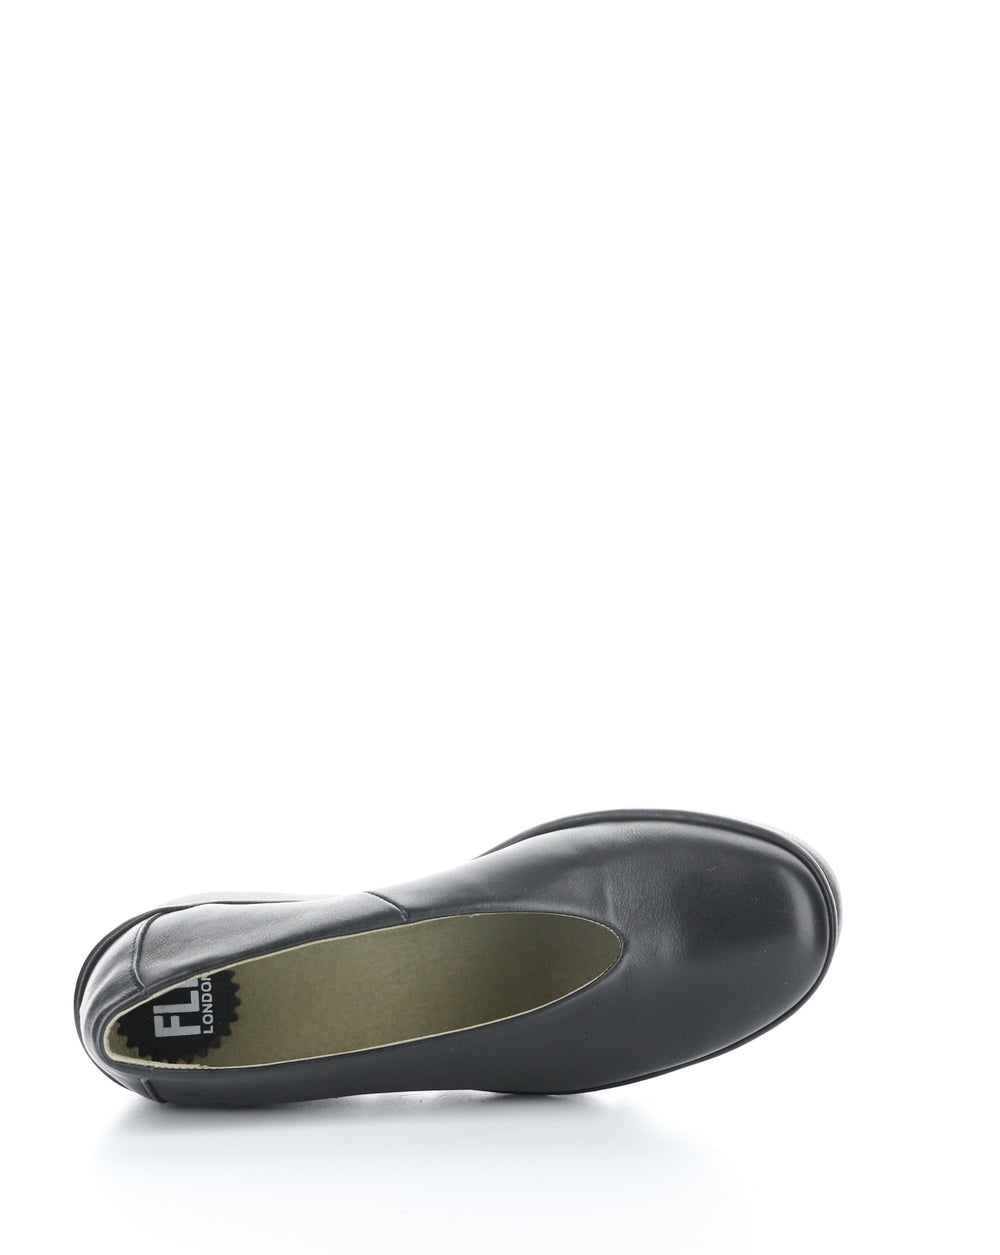 BESO246FLY 012 BLACK Slip-on Shoes